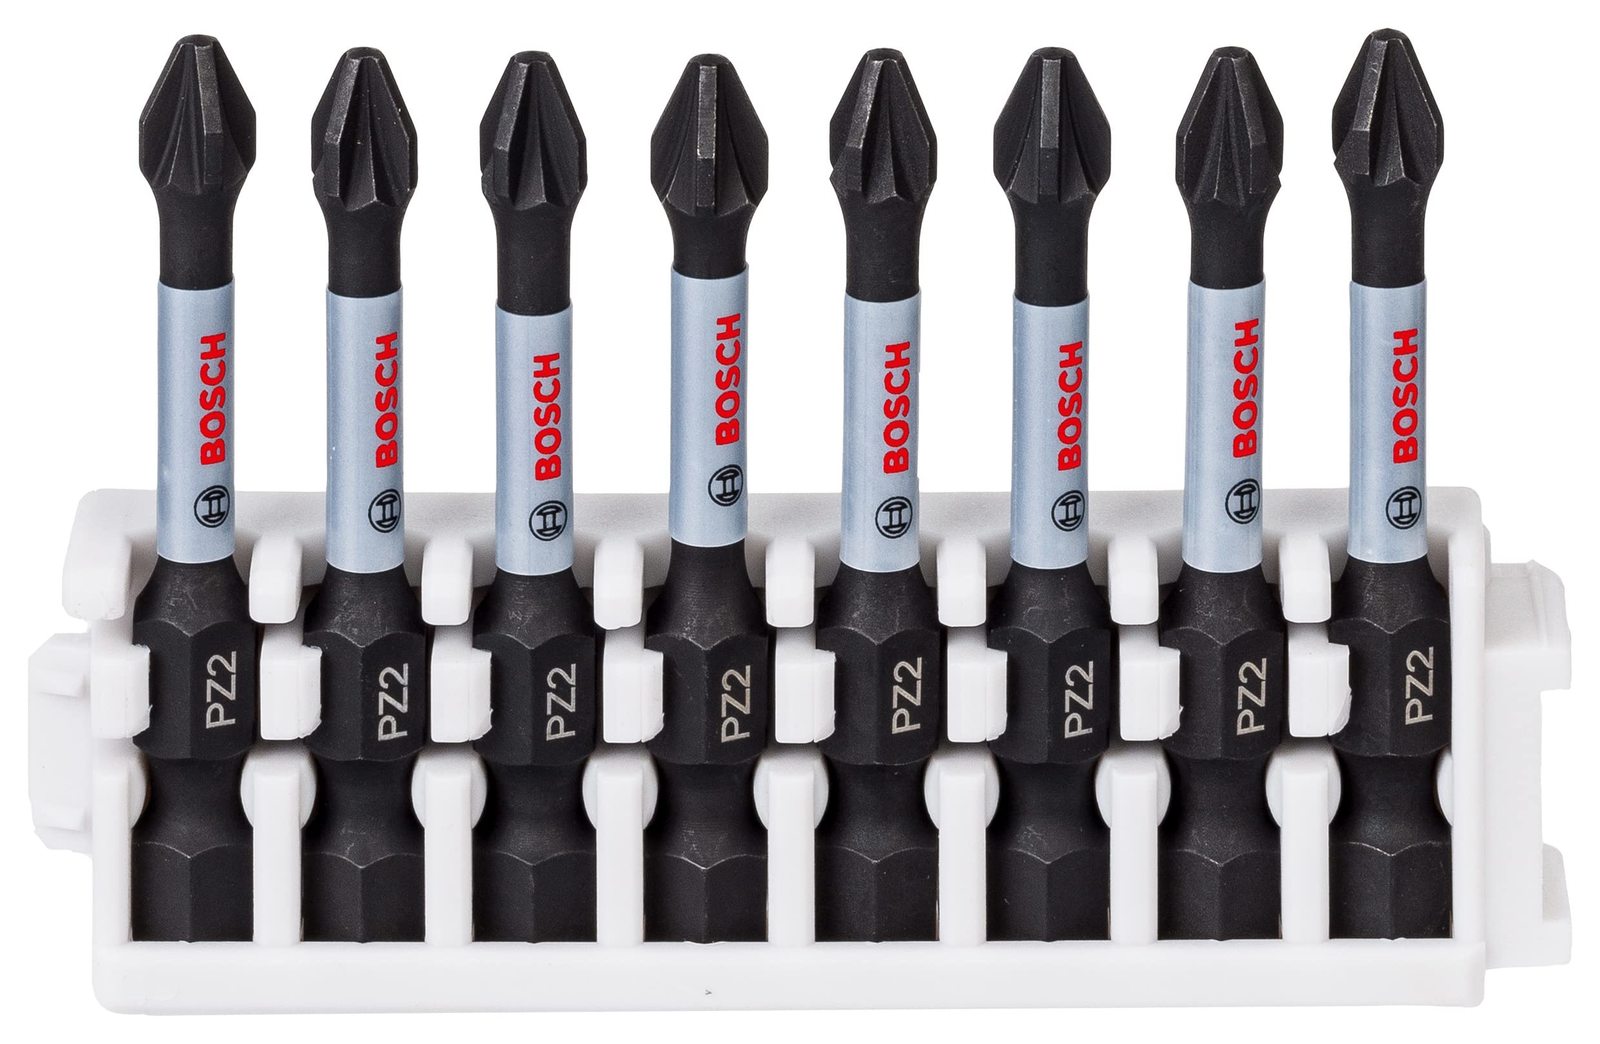 Bosch Torx impact control 50mm screw tip set with 8 pieces - $21.80